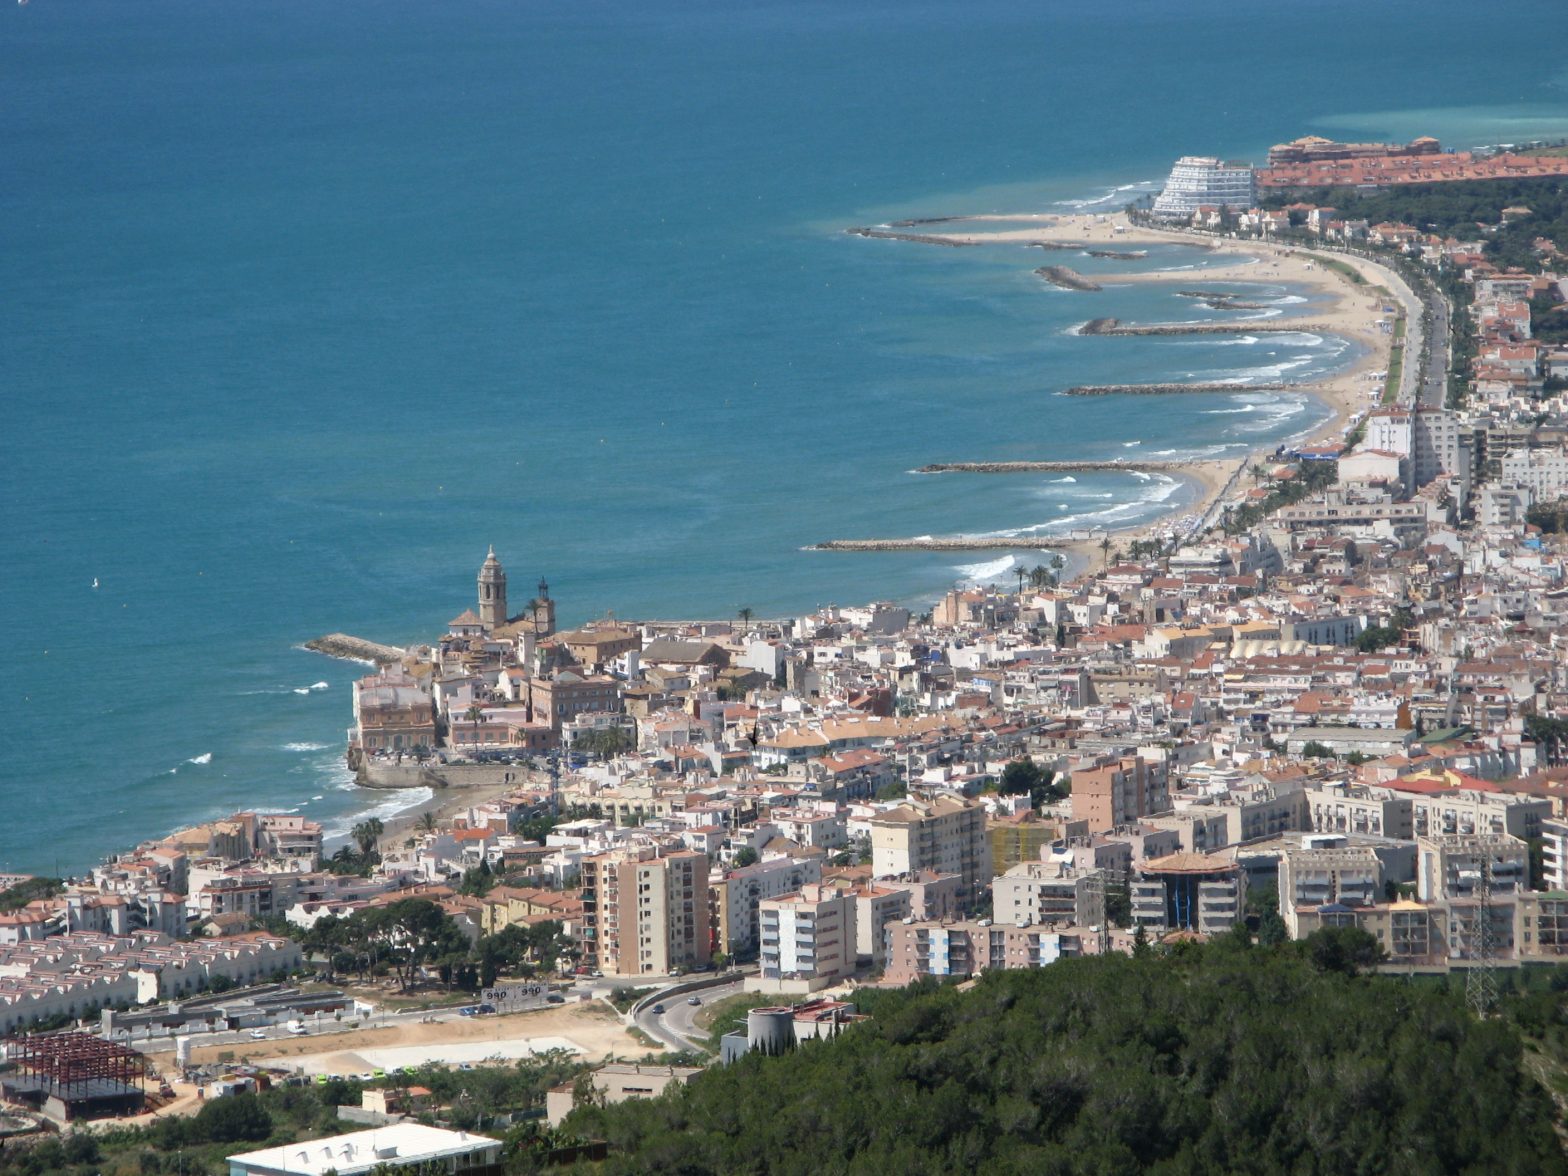 About buying an apartment or house in Sitges - Barcelona ( new development 2022)